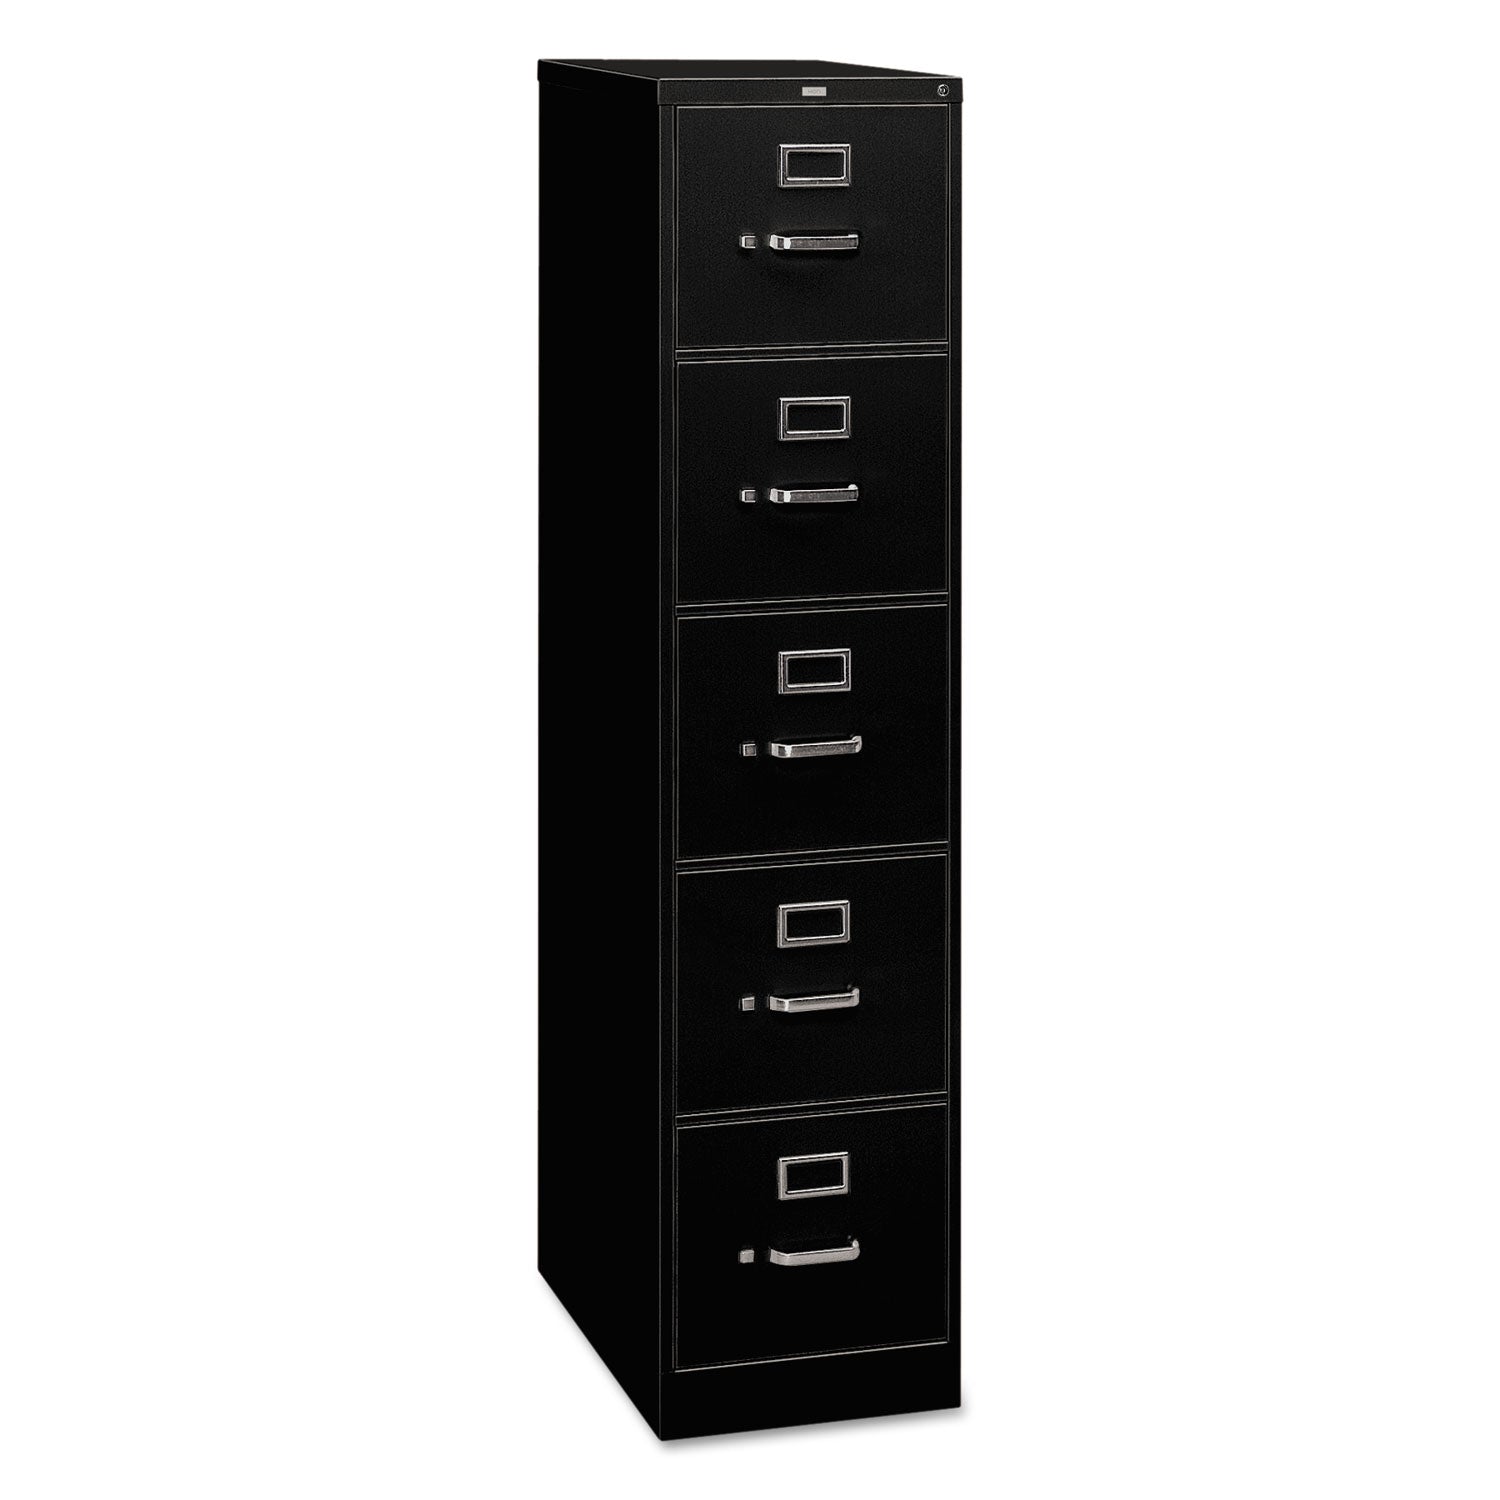 310 Series Vertical File, 5 Legal-Size File Drawers, Black, 18.25" x 26.5" x 60 - 